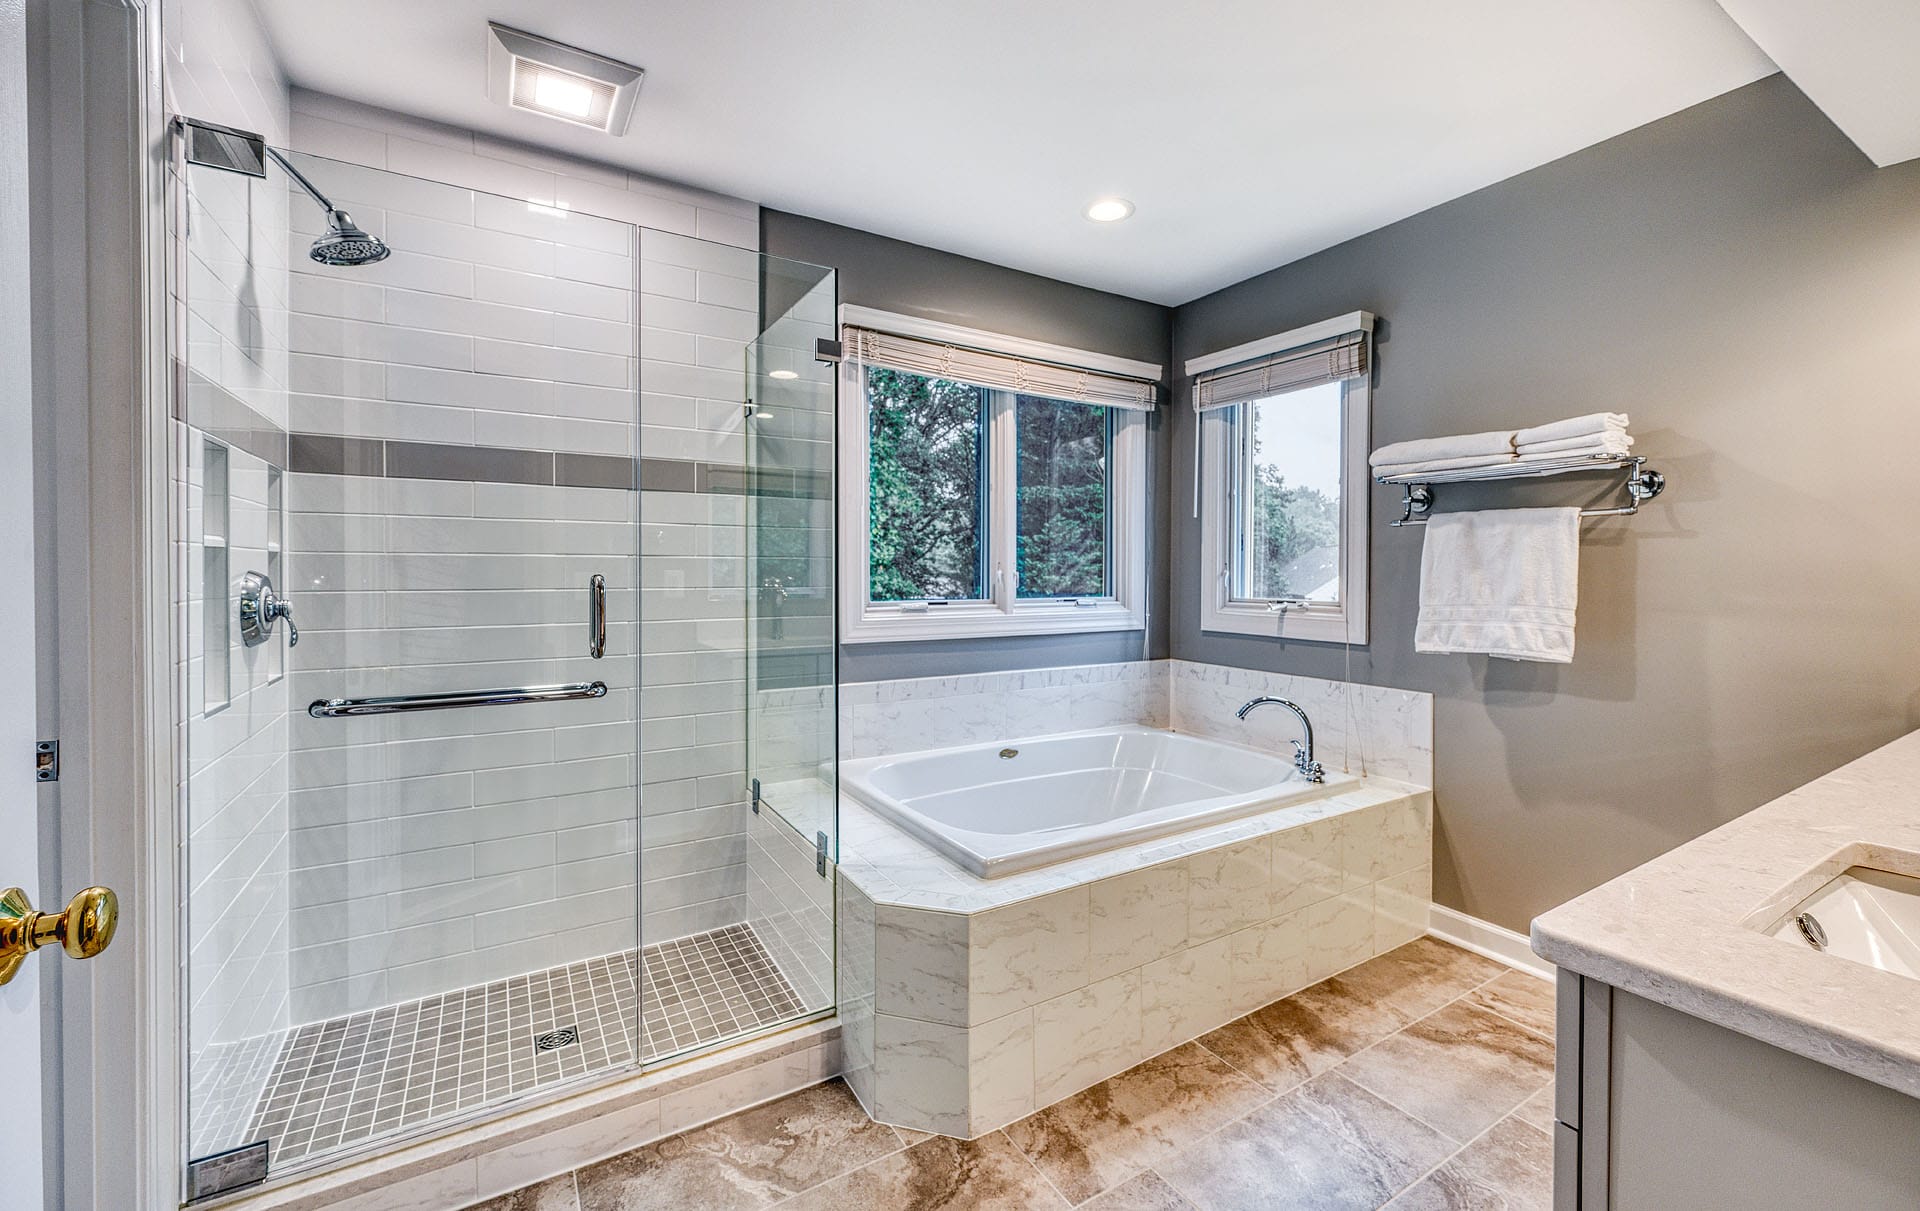 Primary bathroom remodel, Springfield, VA with warm tones including marble tub surround and glass enclosed shower